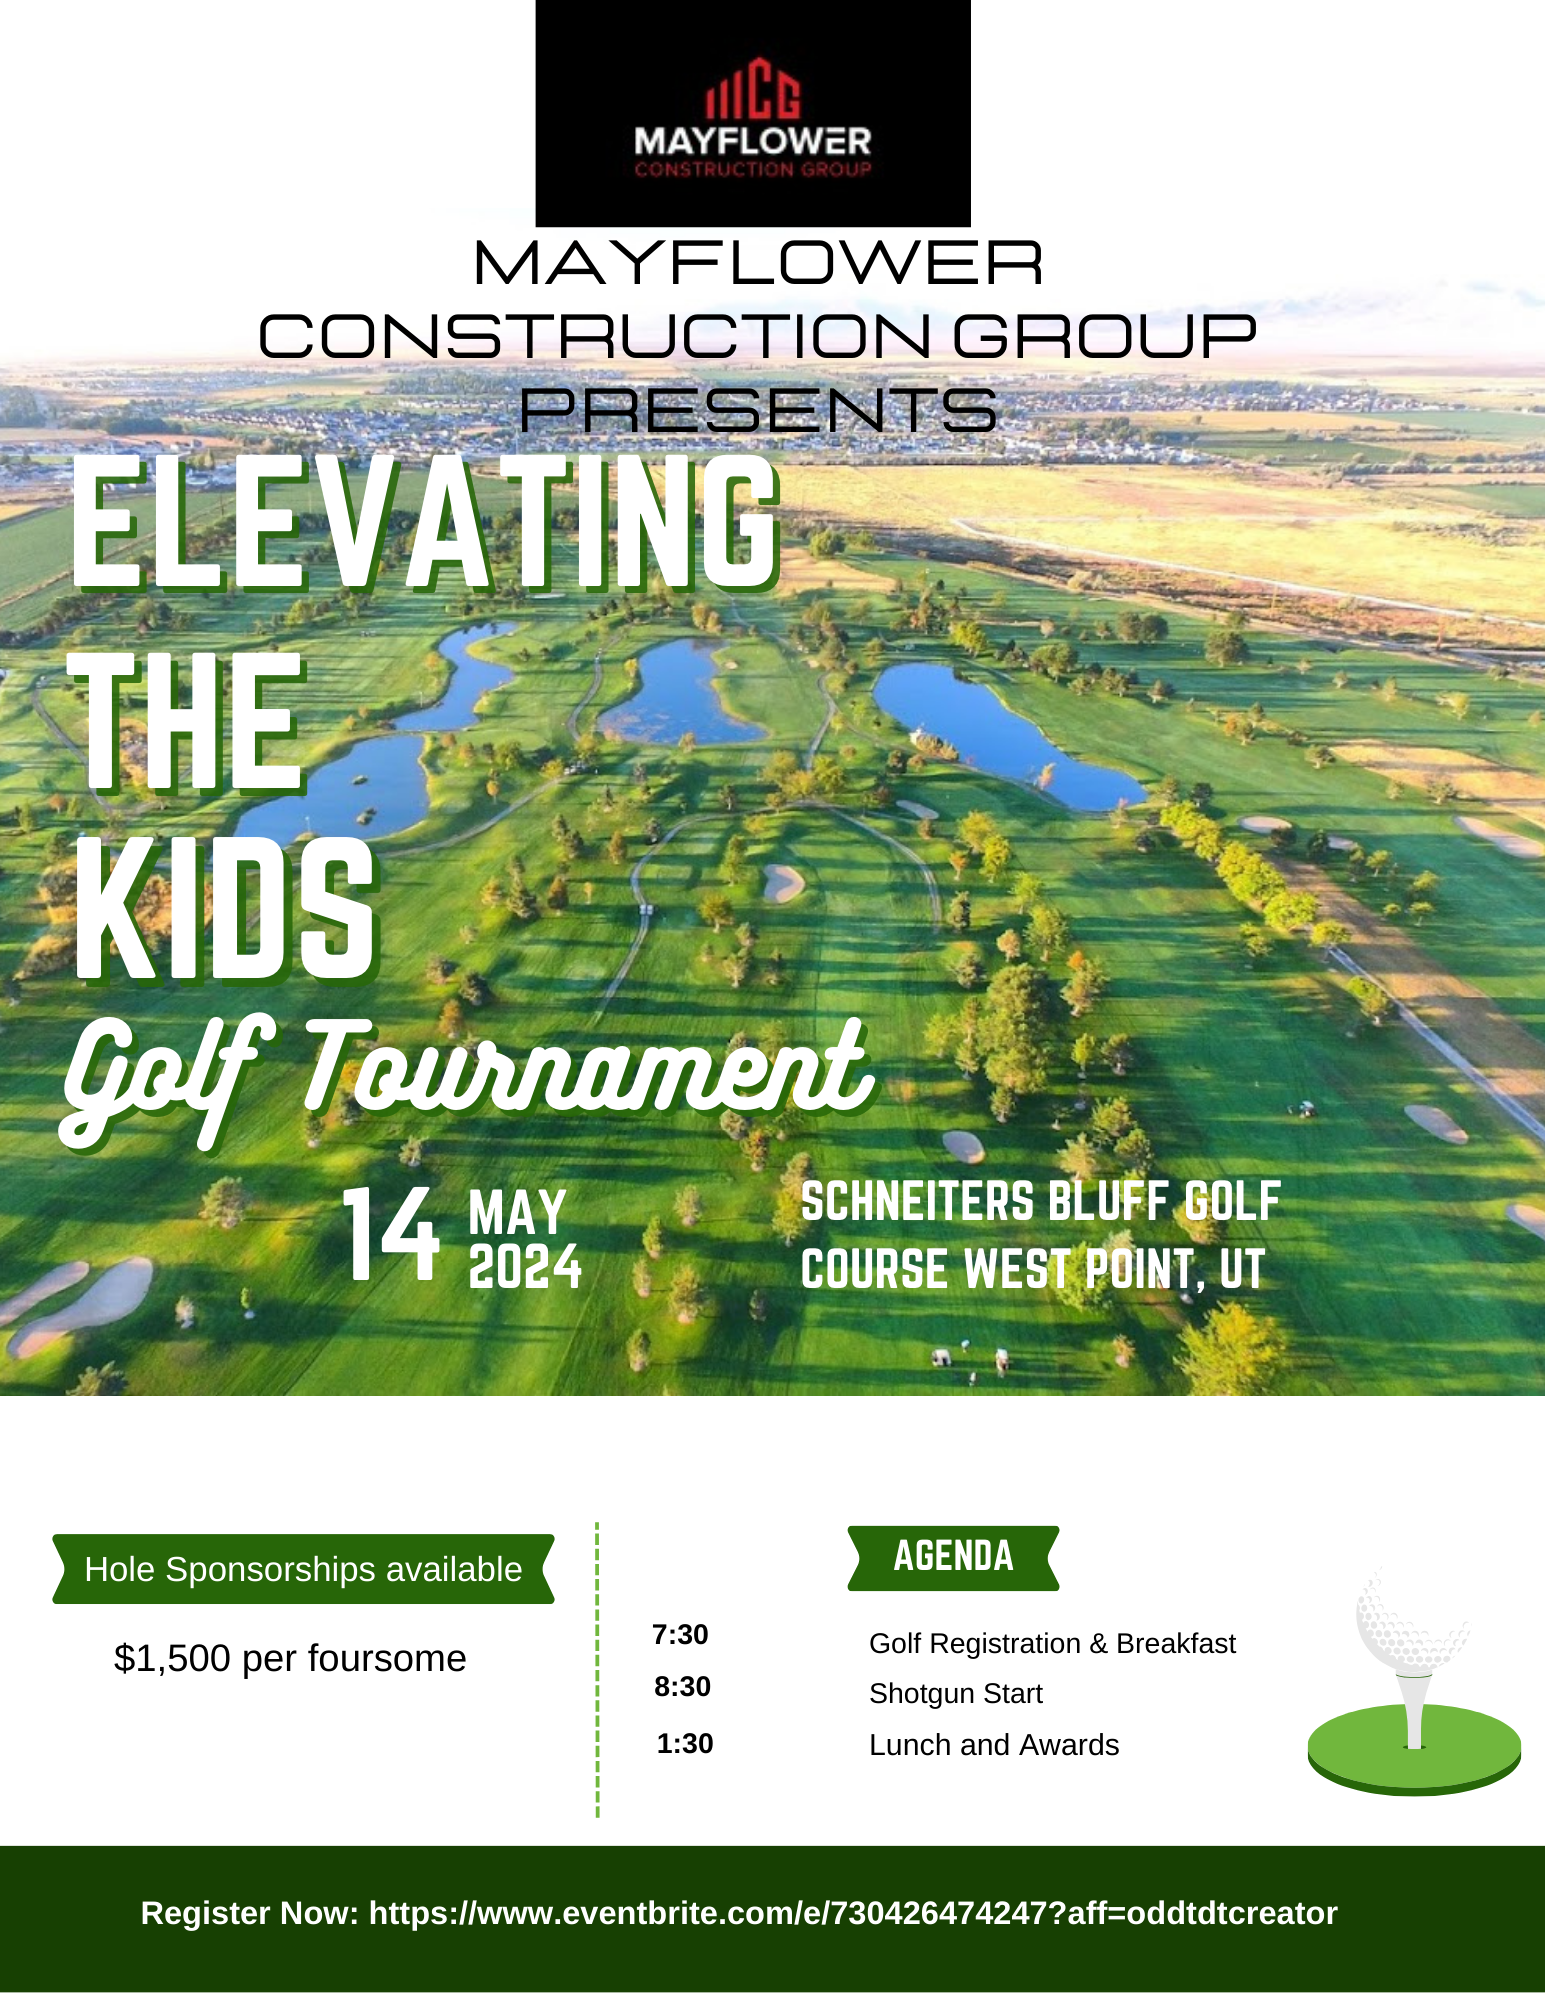 Mayflower Construction Presents Elevating the Kids Charity Golf Tournament